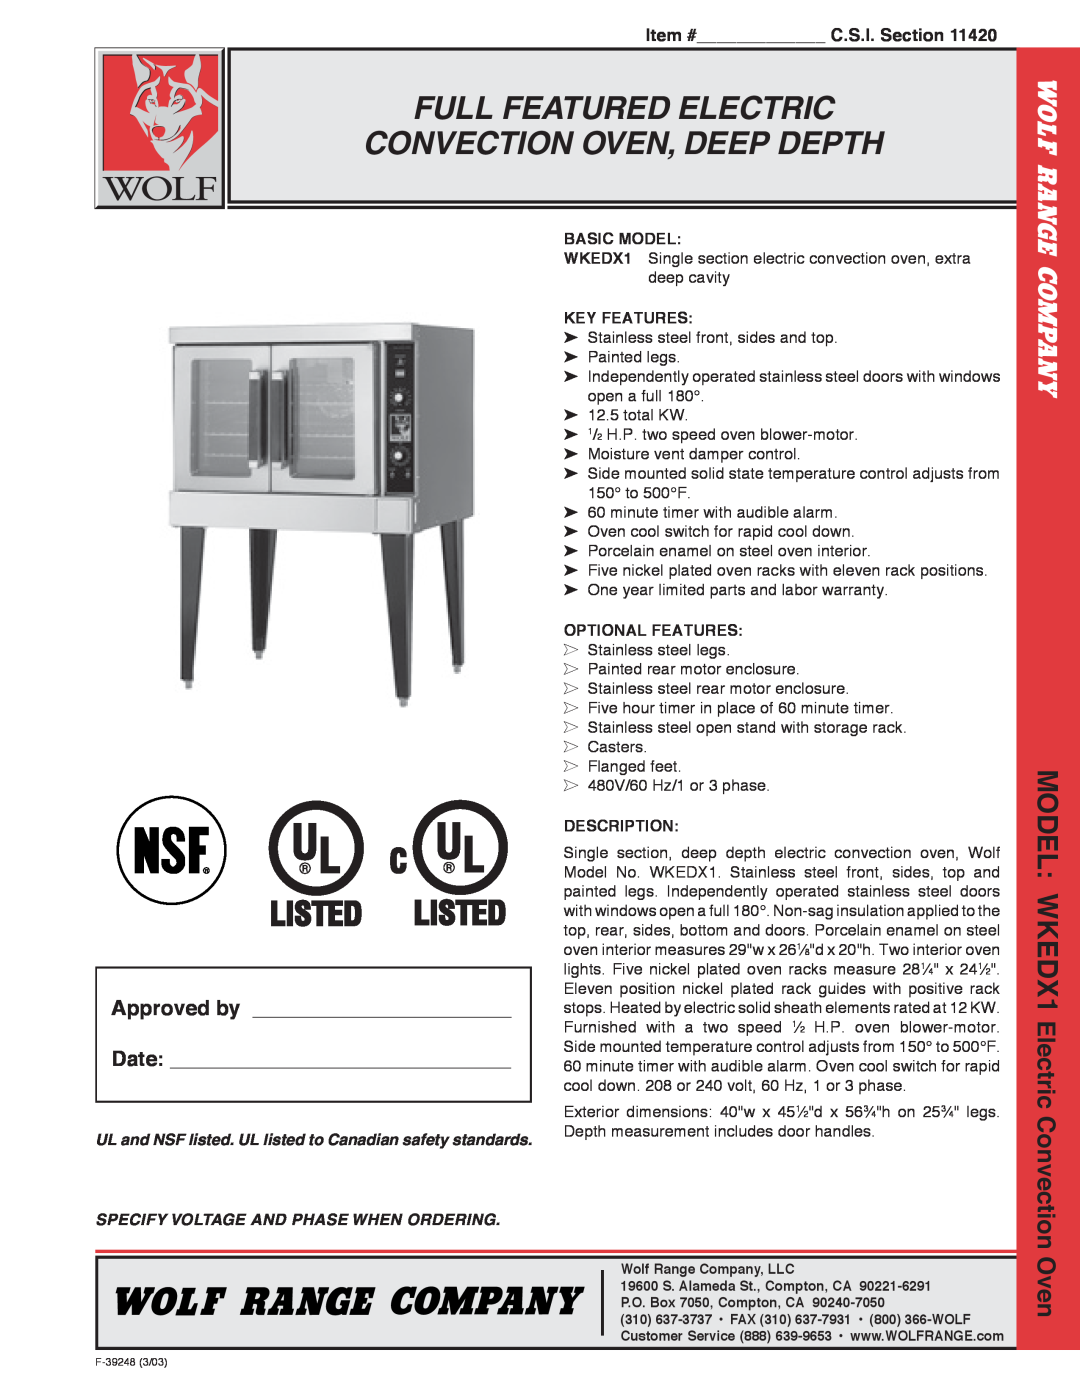 Wolf warranty Full Featured Electric Convection Oven, Deep Depth, MODEL WKEDX1, Approved by Date, Item # C.S.I. Section 